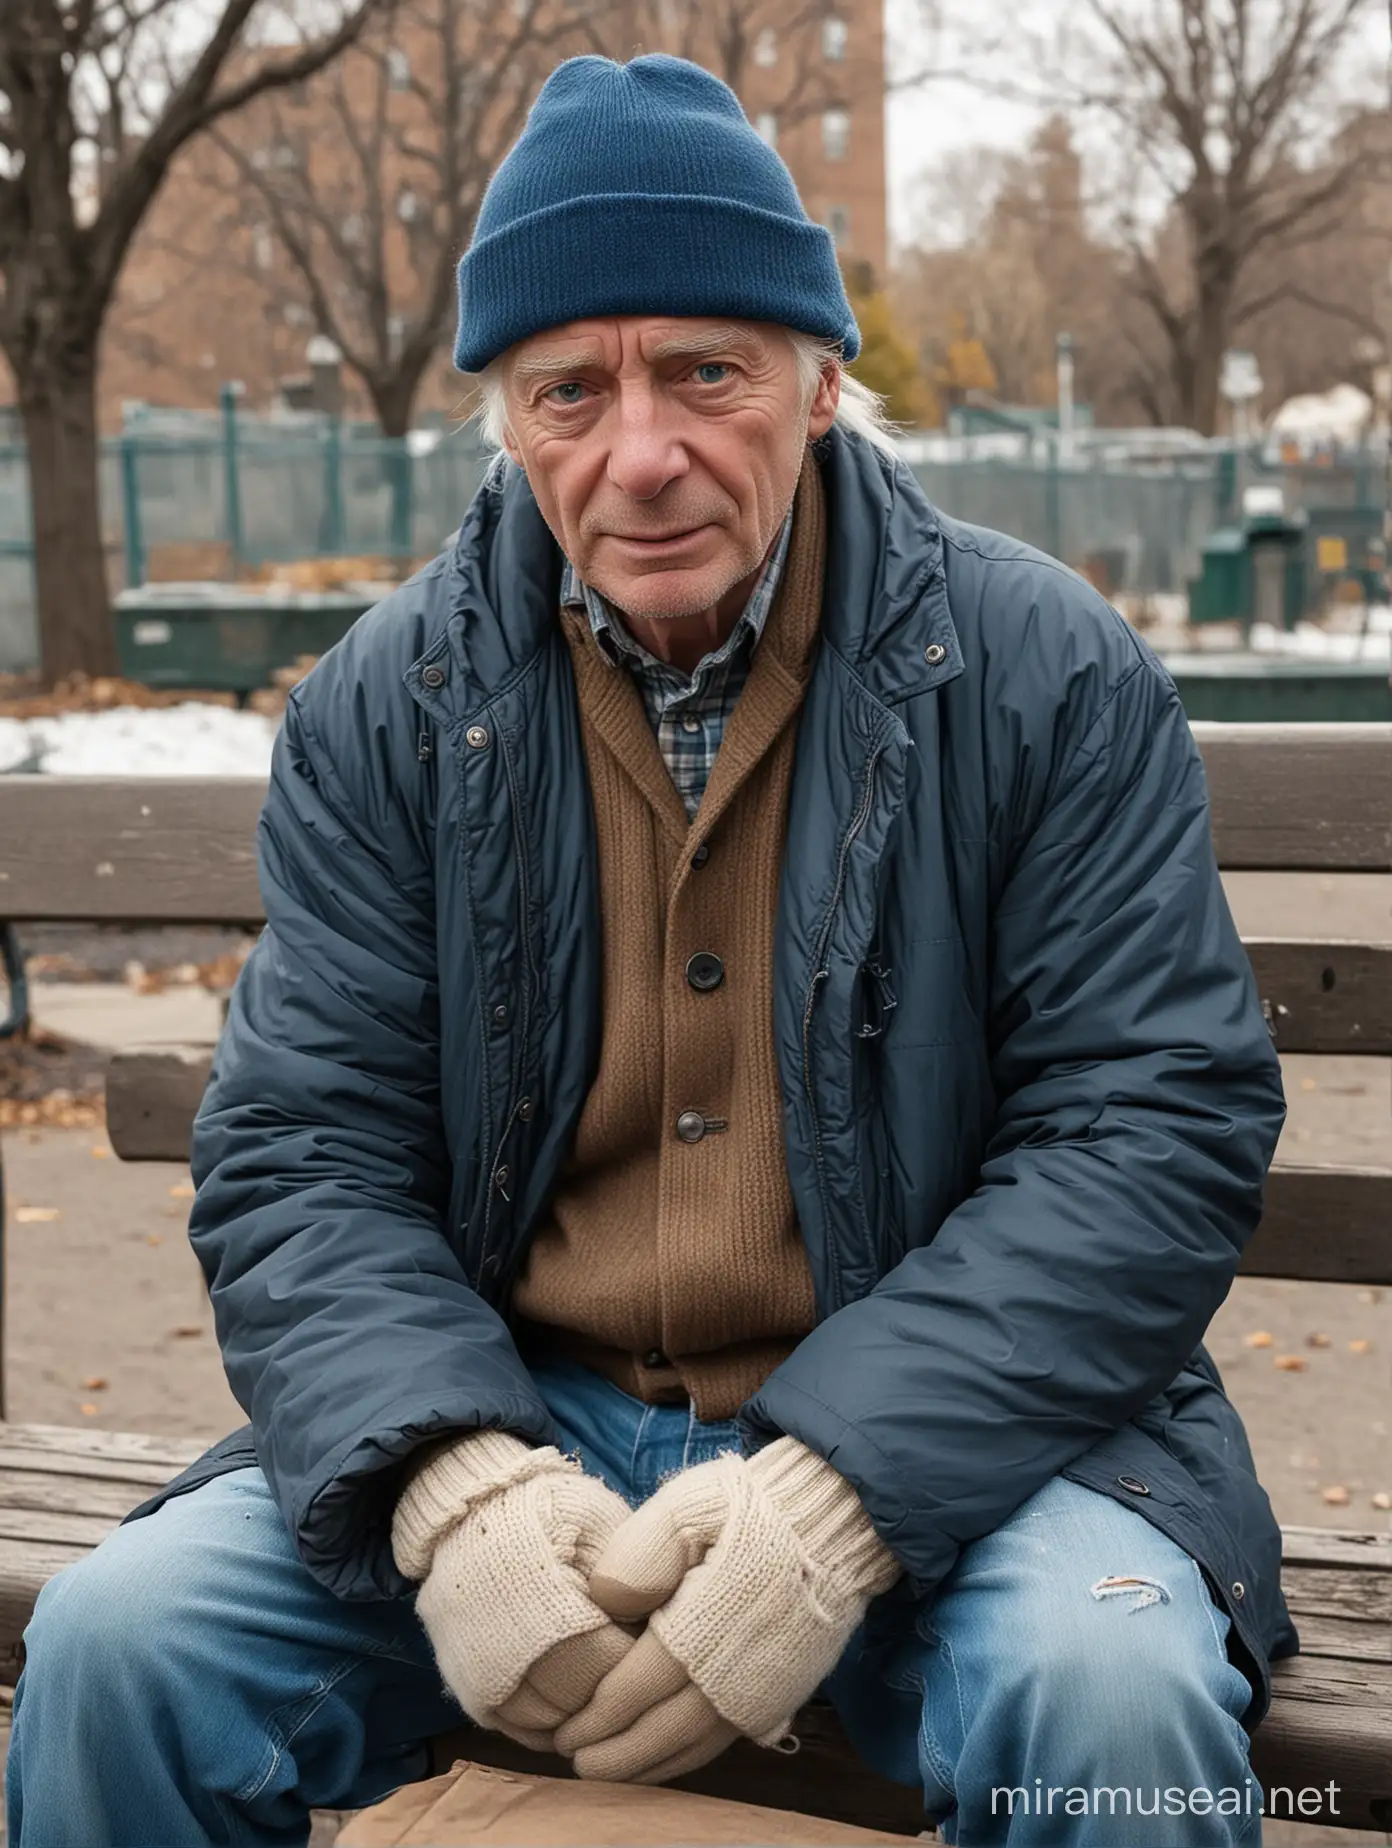 Senior Citizen Homeless Man in Winter Clothing Seated on Park Bench